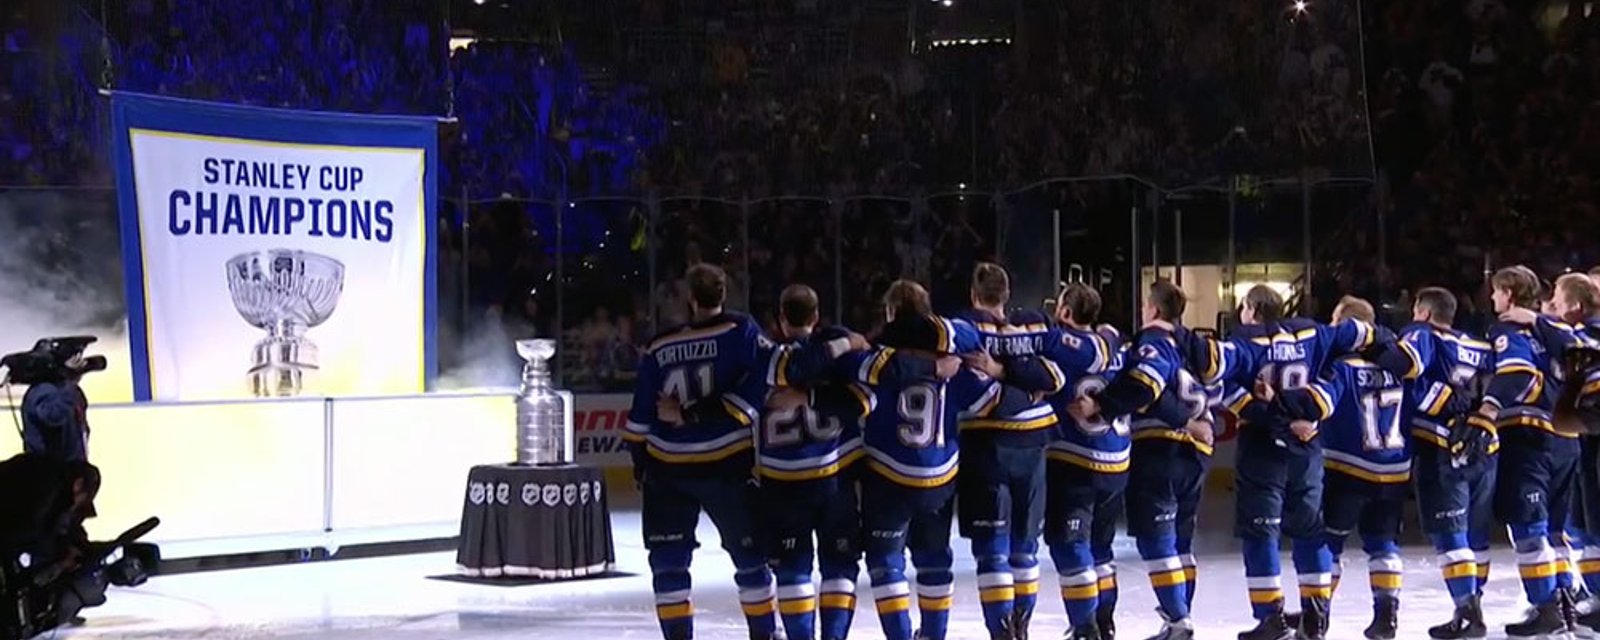 The Blues play “Gloria” one last time as their Stanley Cup banner ascends into the rafters